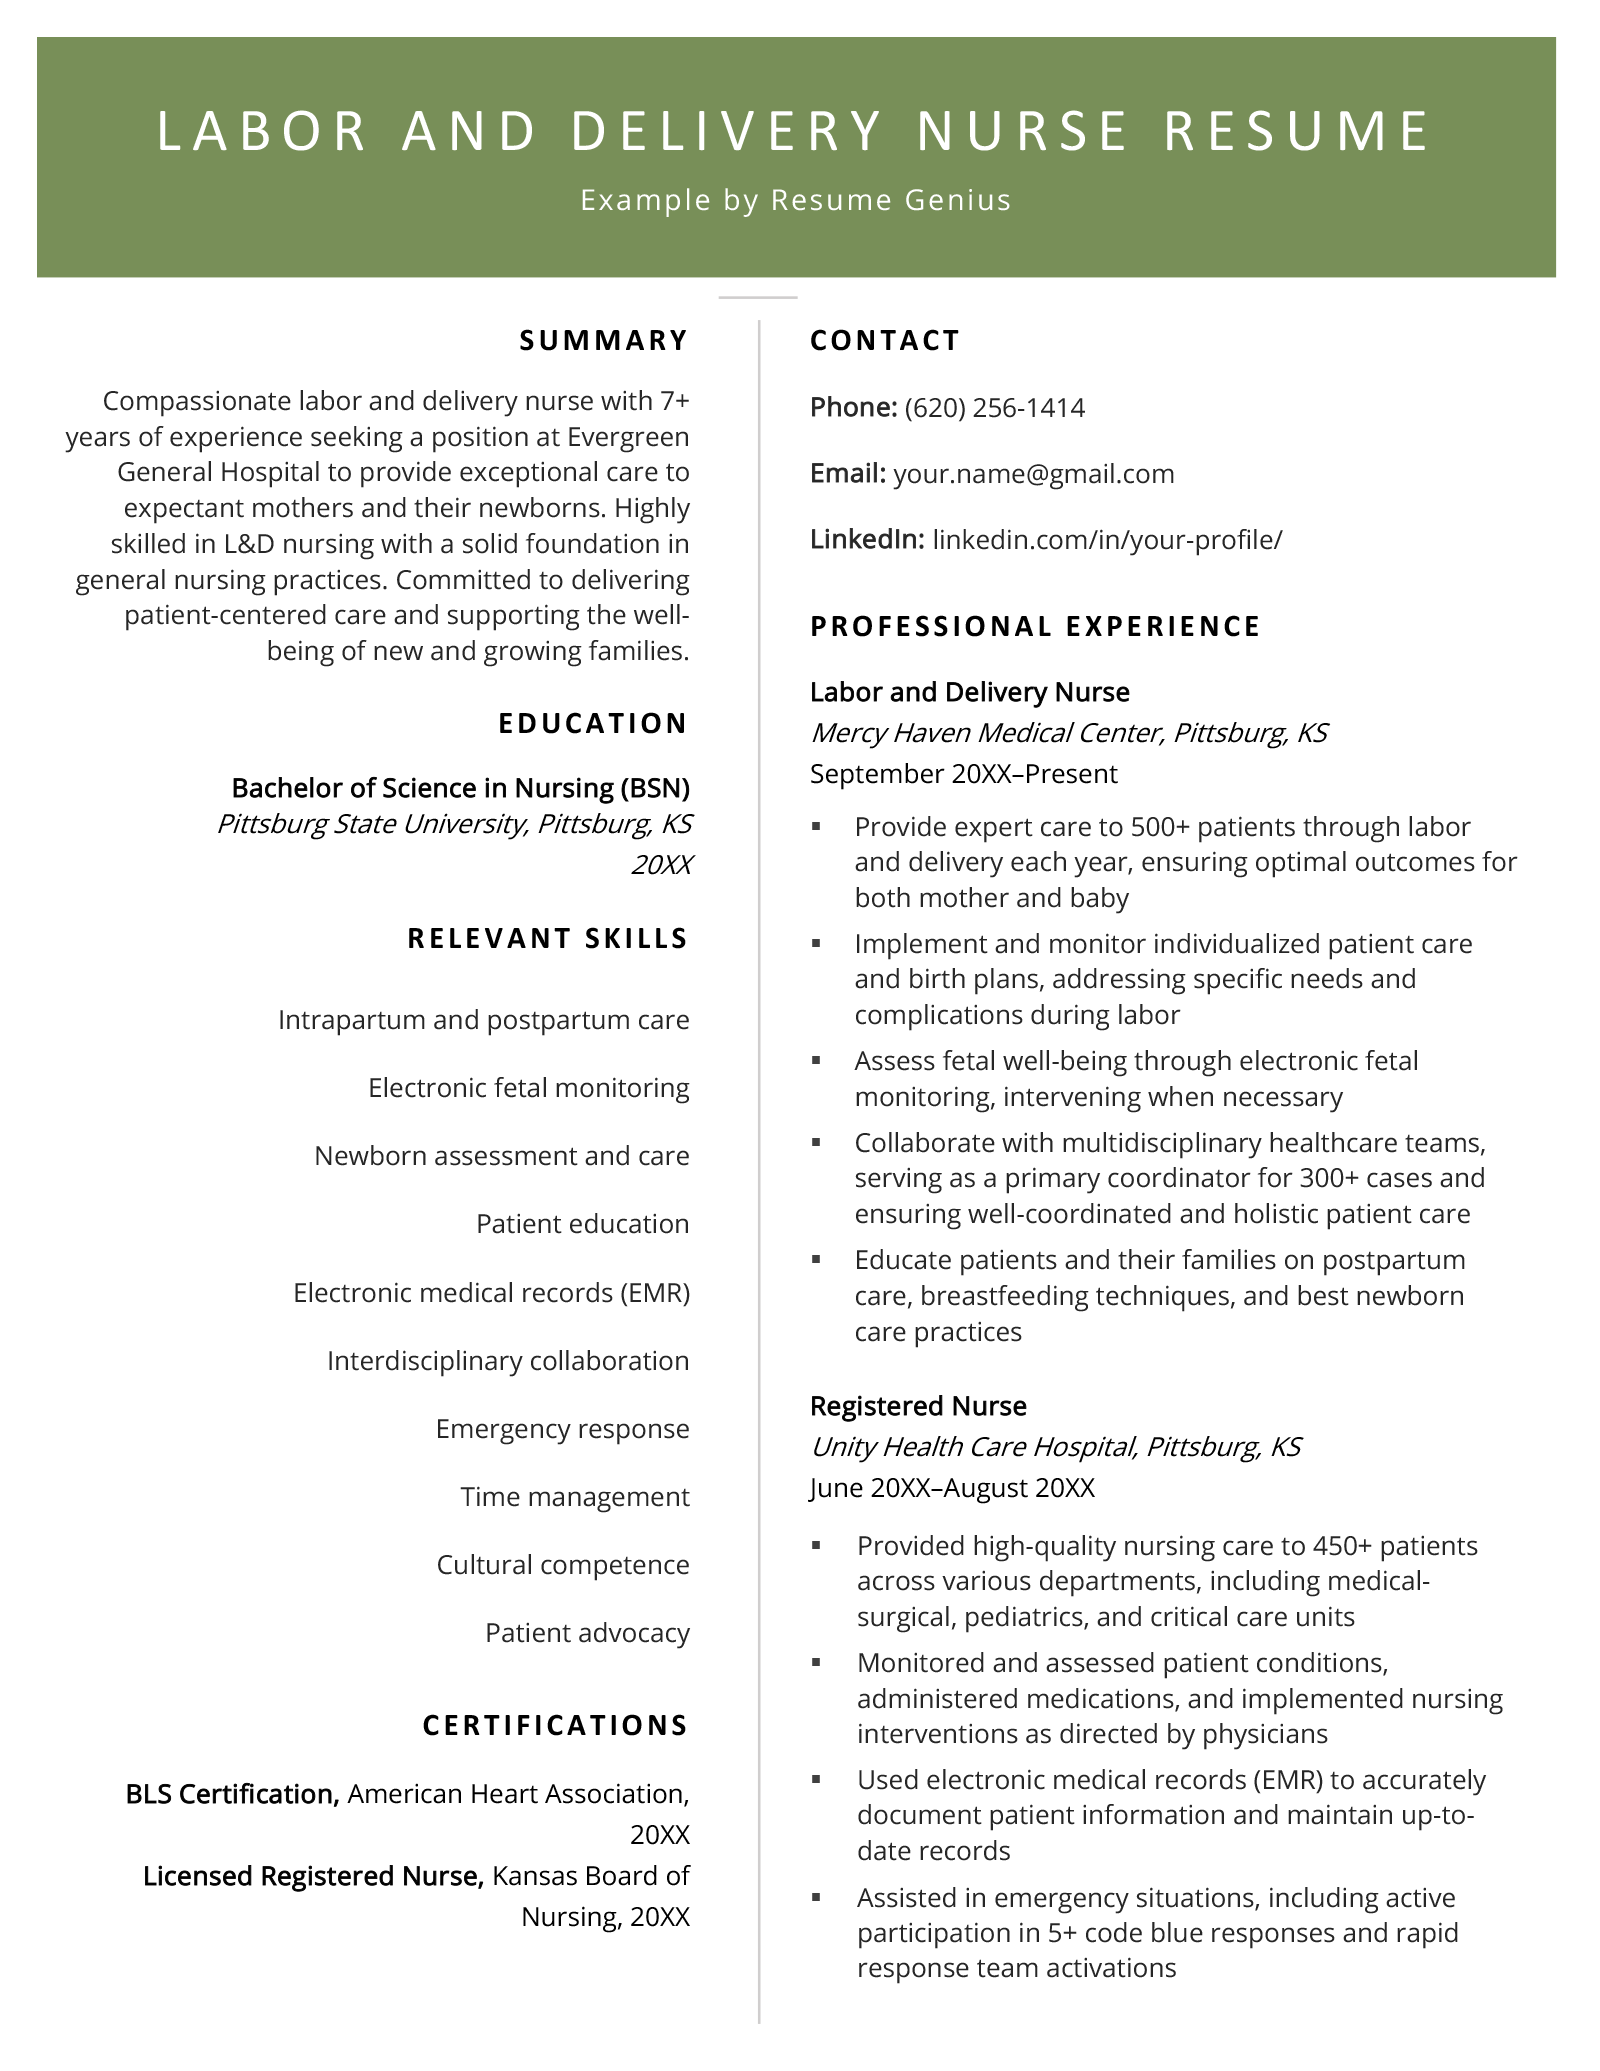 Two-column labor and delivery nurse resume example that features a bold green header.